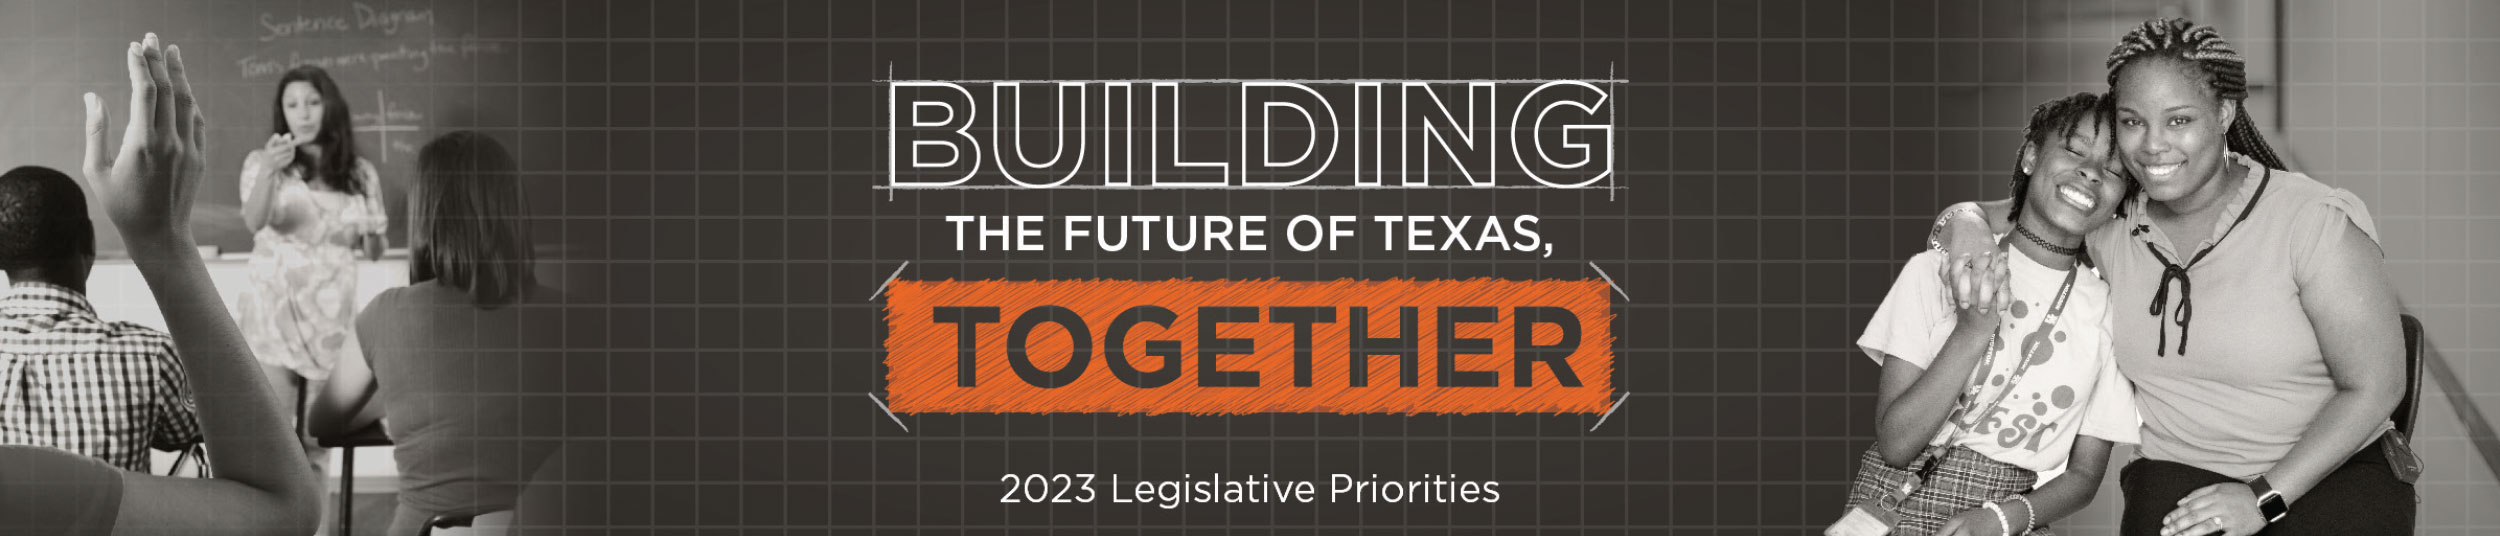 Building the Future of Texas Together